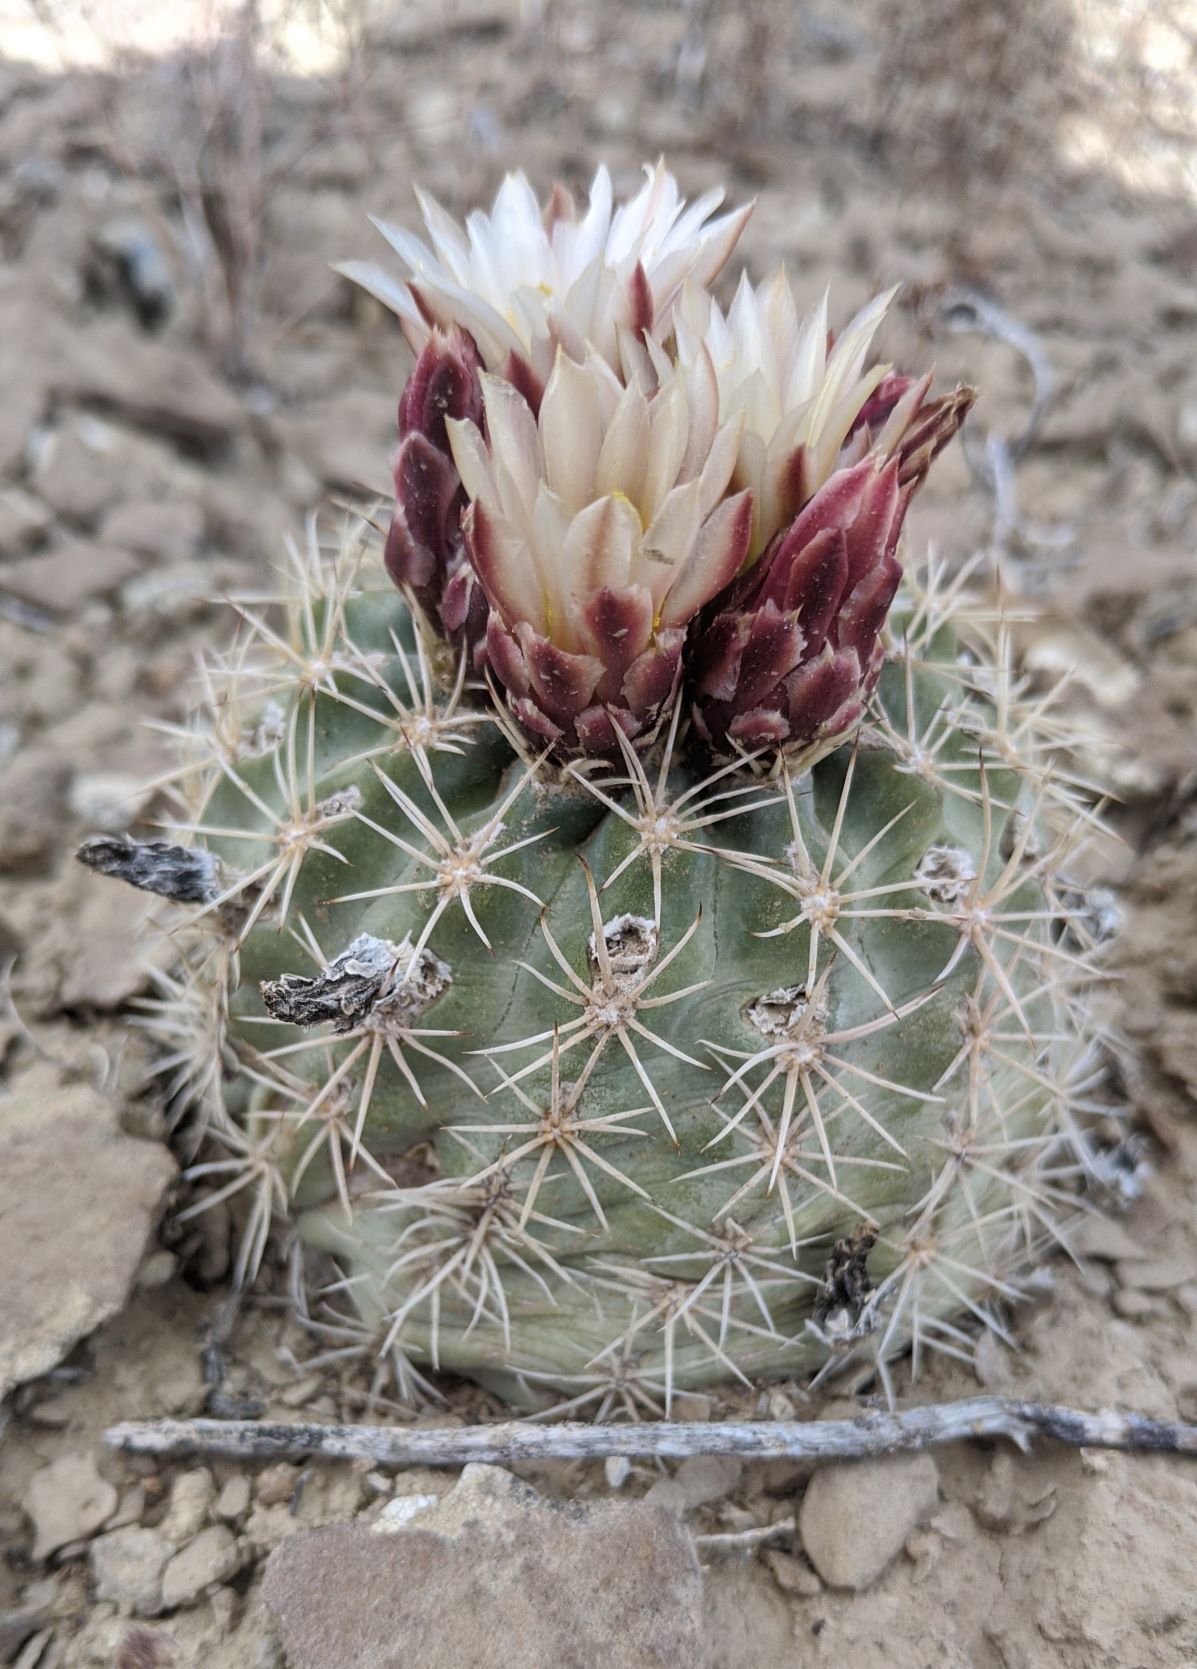 Tiny blooming cactus in rocky landscape